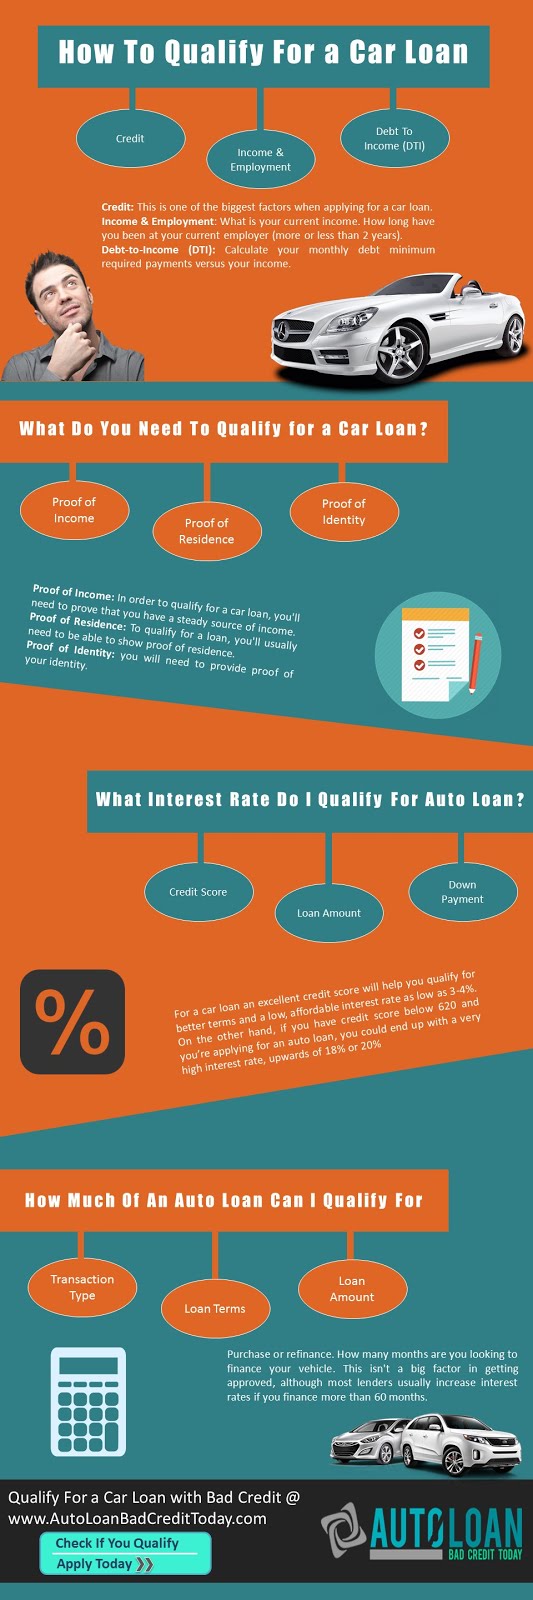 How To Qualify For Auto Loan?